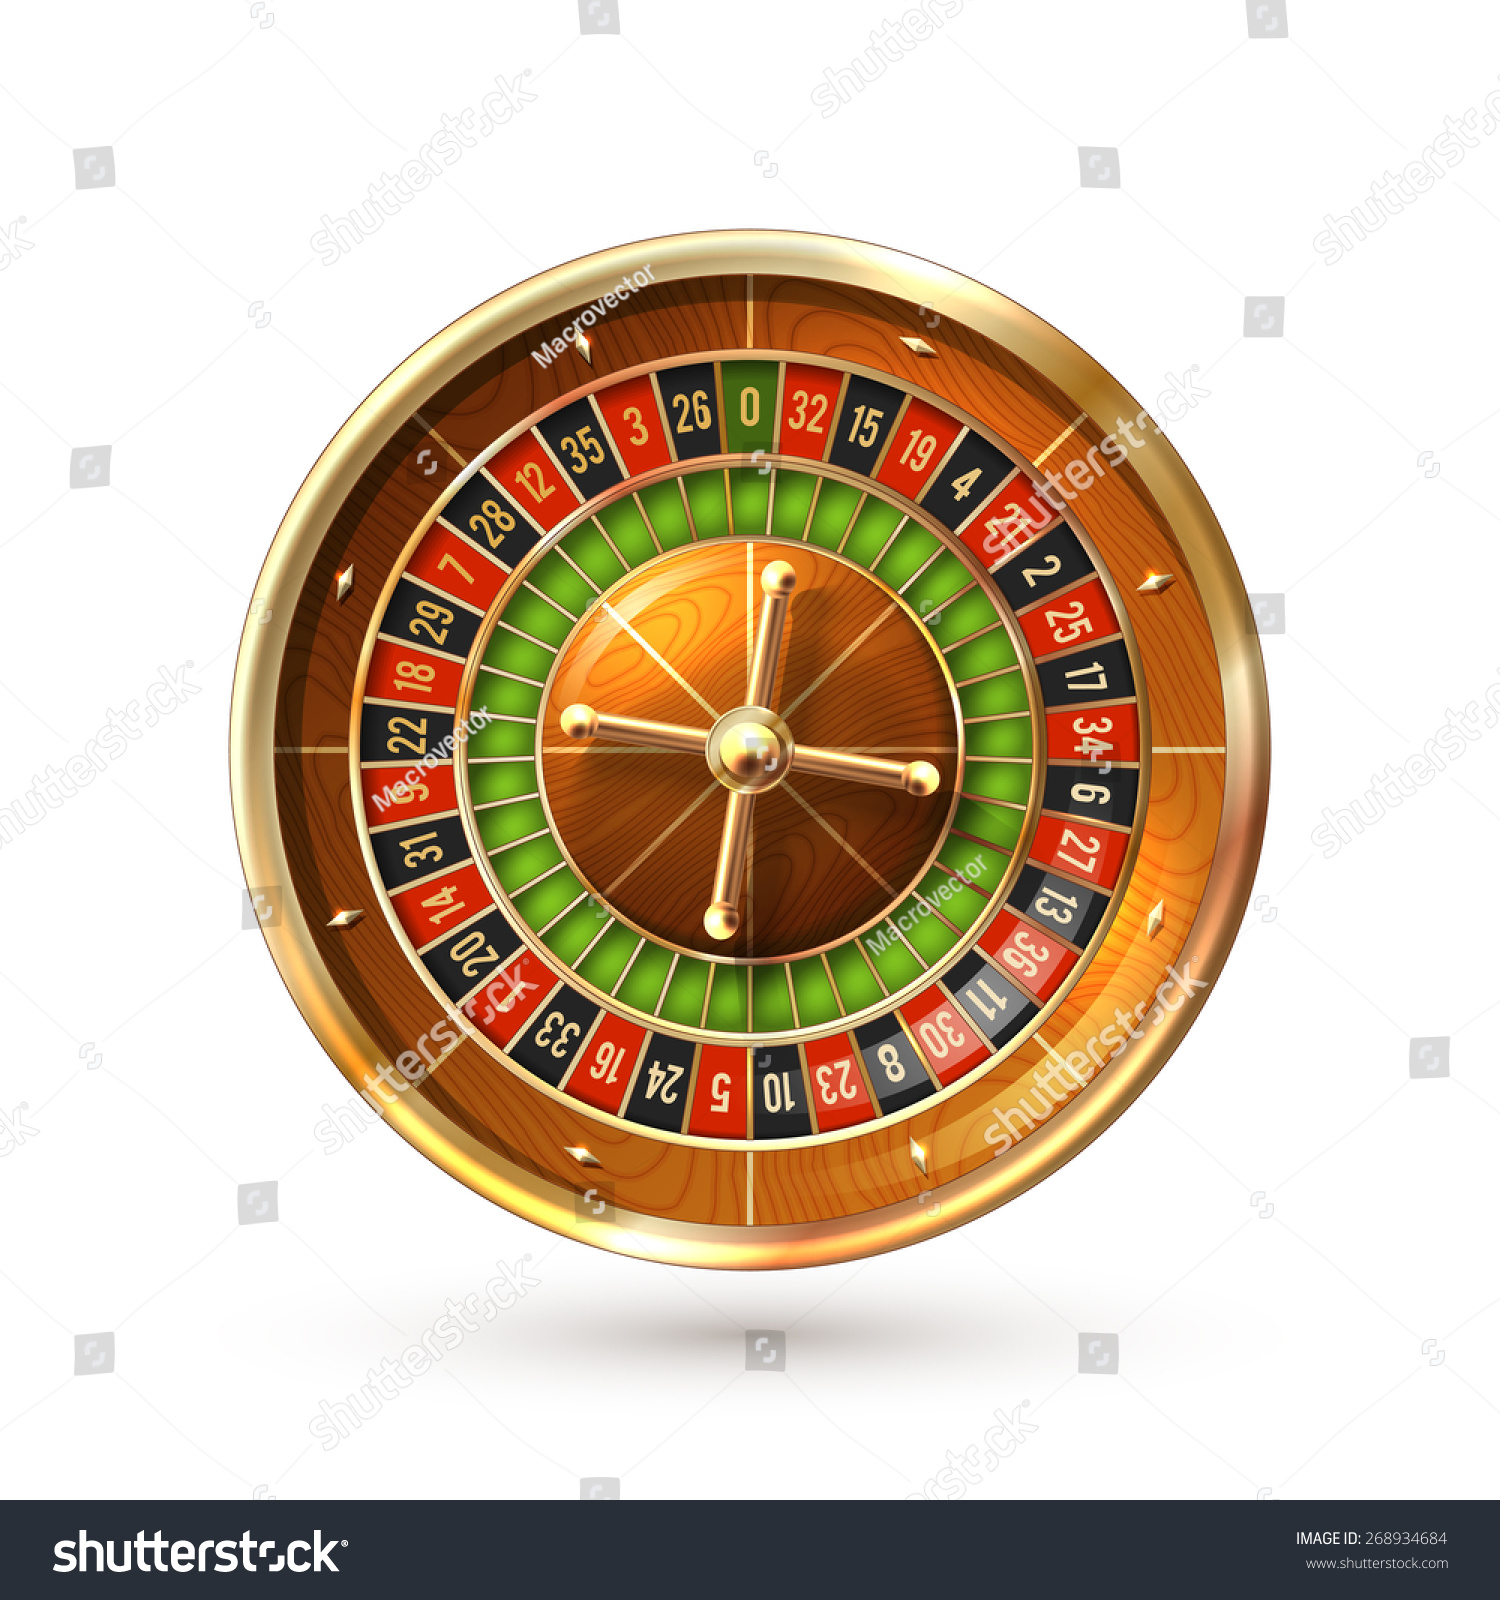 Realistic Casino Gambling Roulette Wheel Isolated Stock Vector 268934684 - Shutterstock1500 x 1600